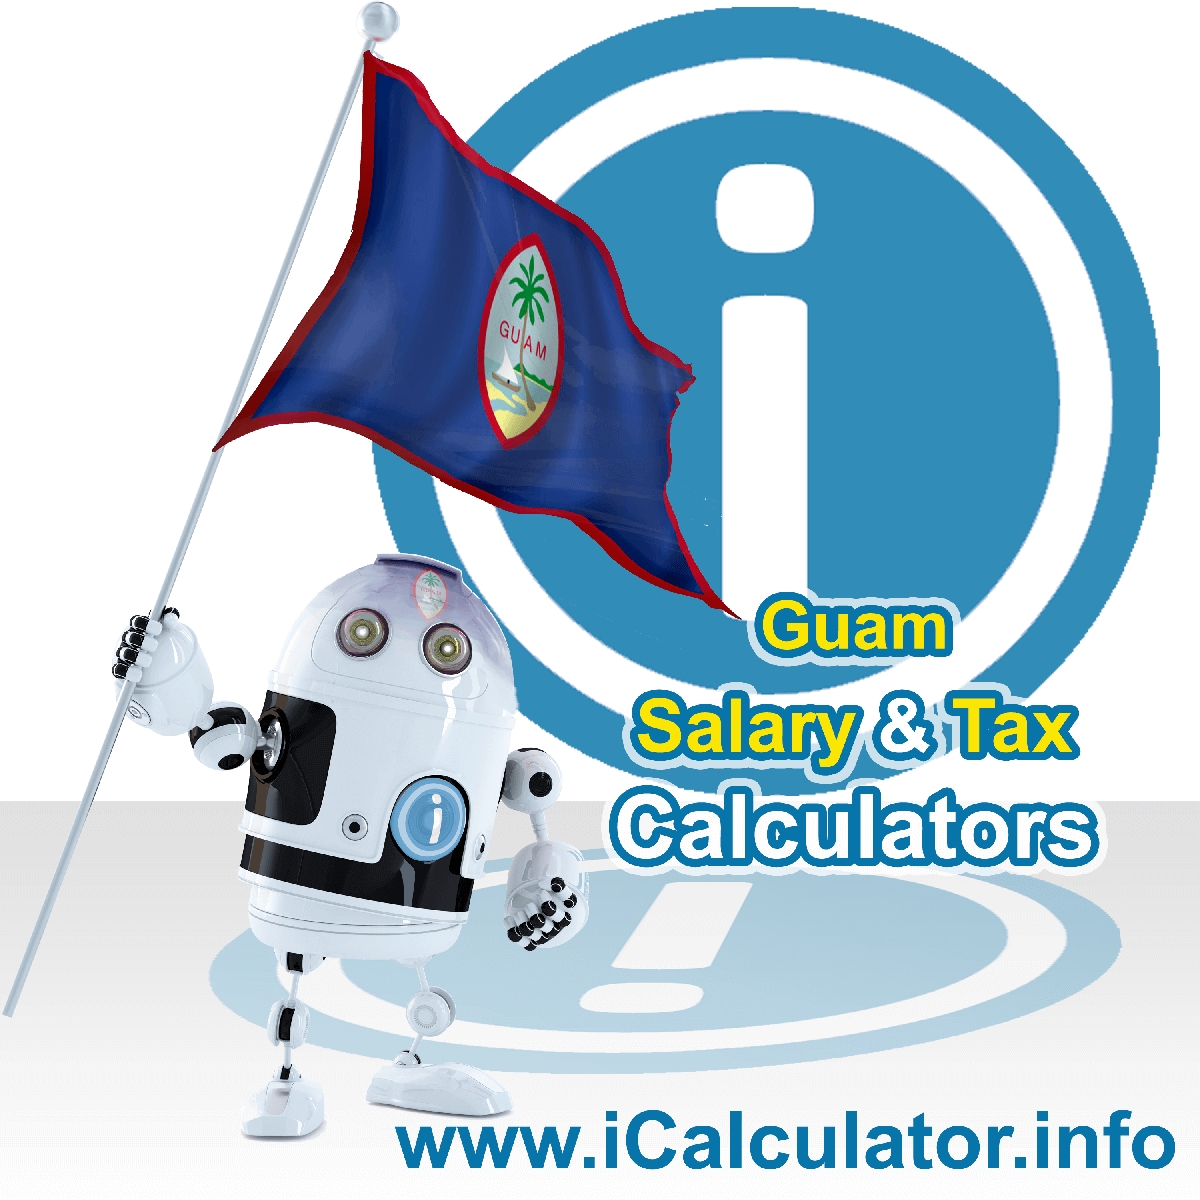 Guam Wage Calculator. This image shows the Guam flag and information relating to the tax formula for the Guam Tax Calculator